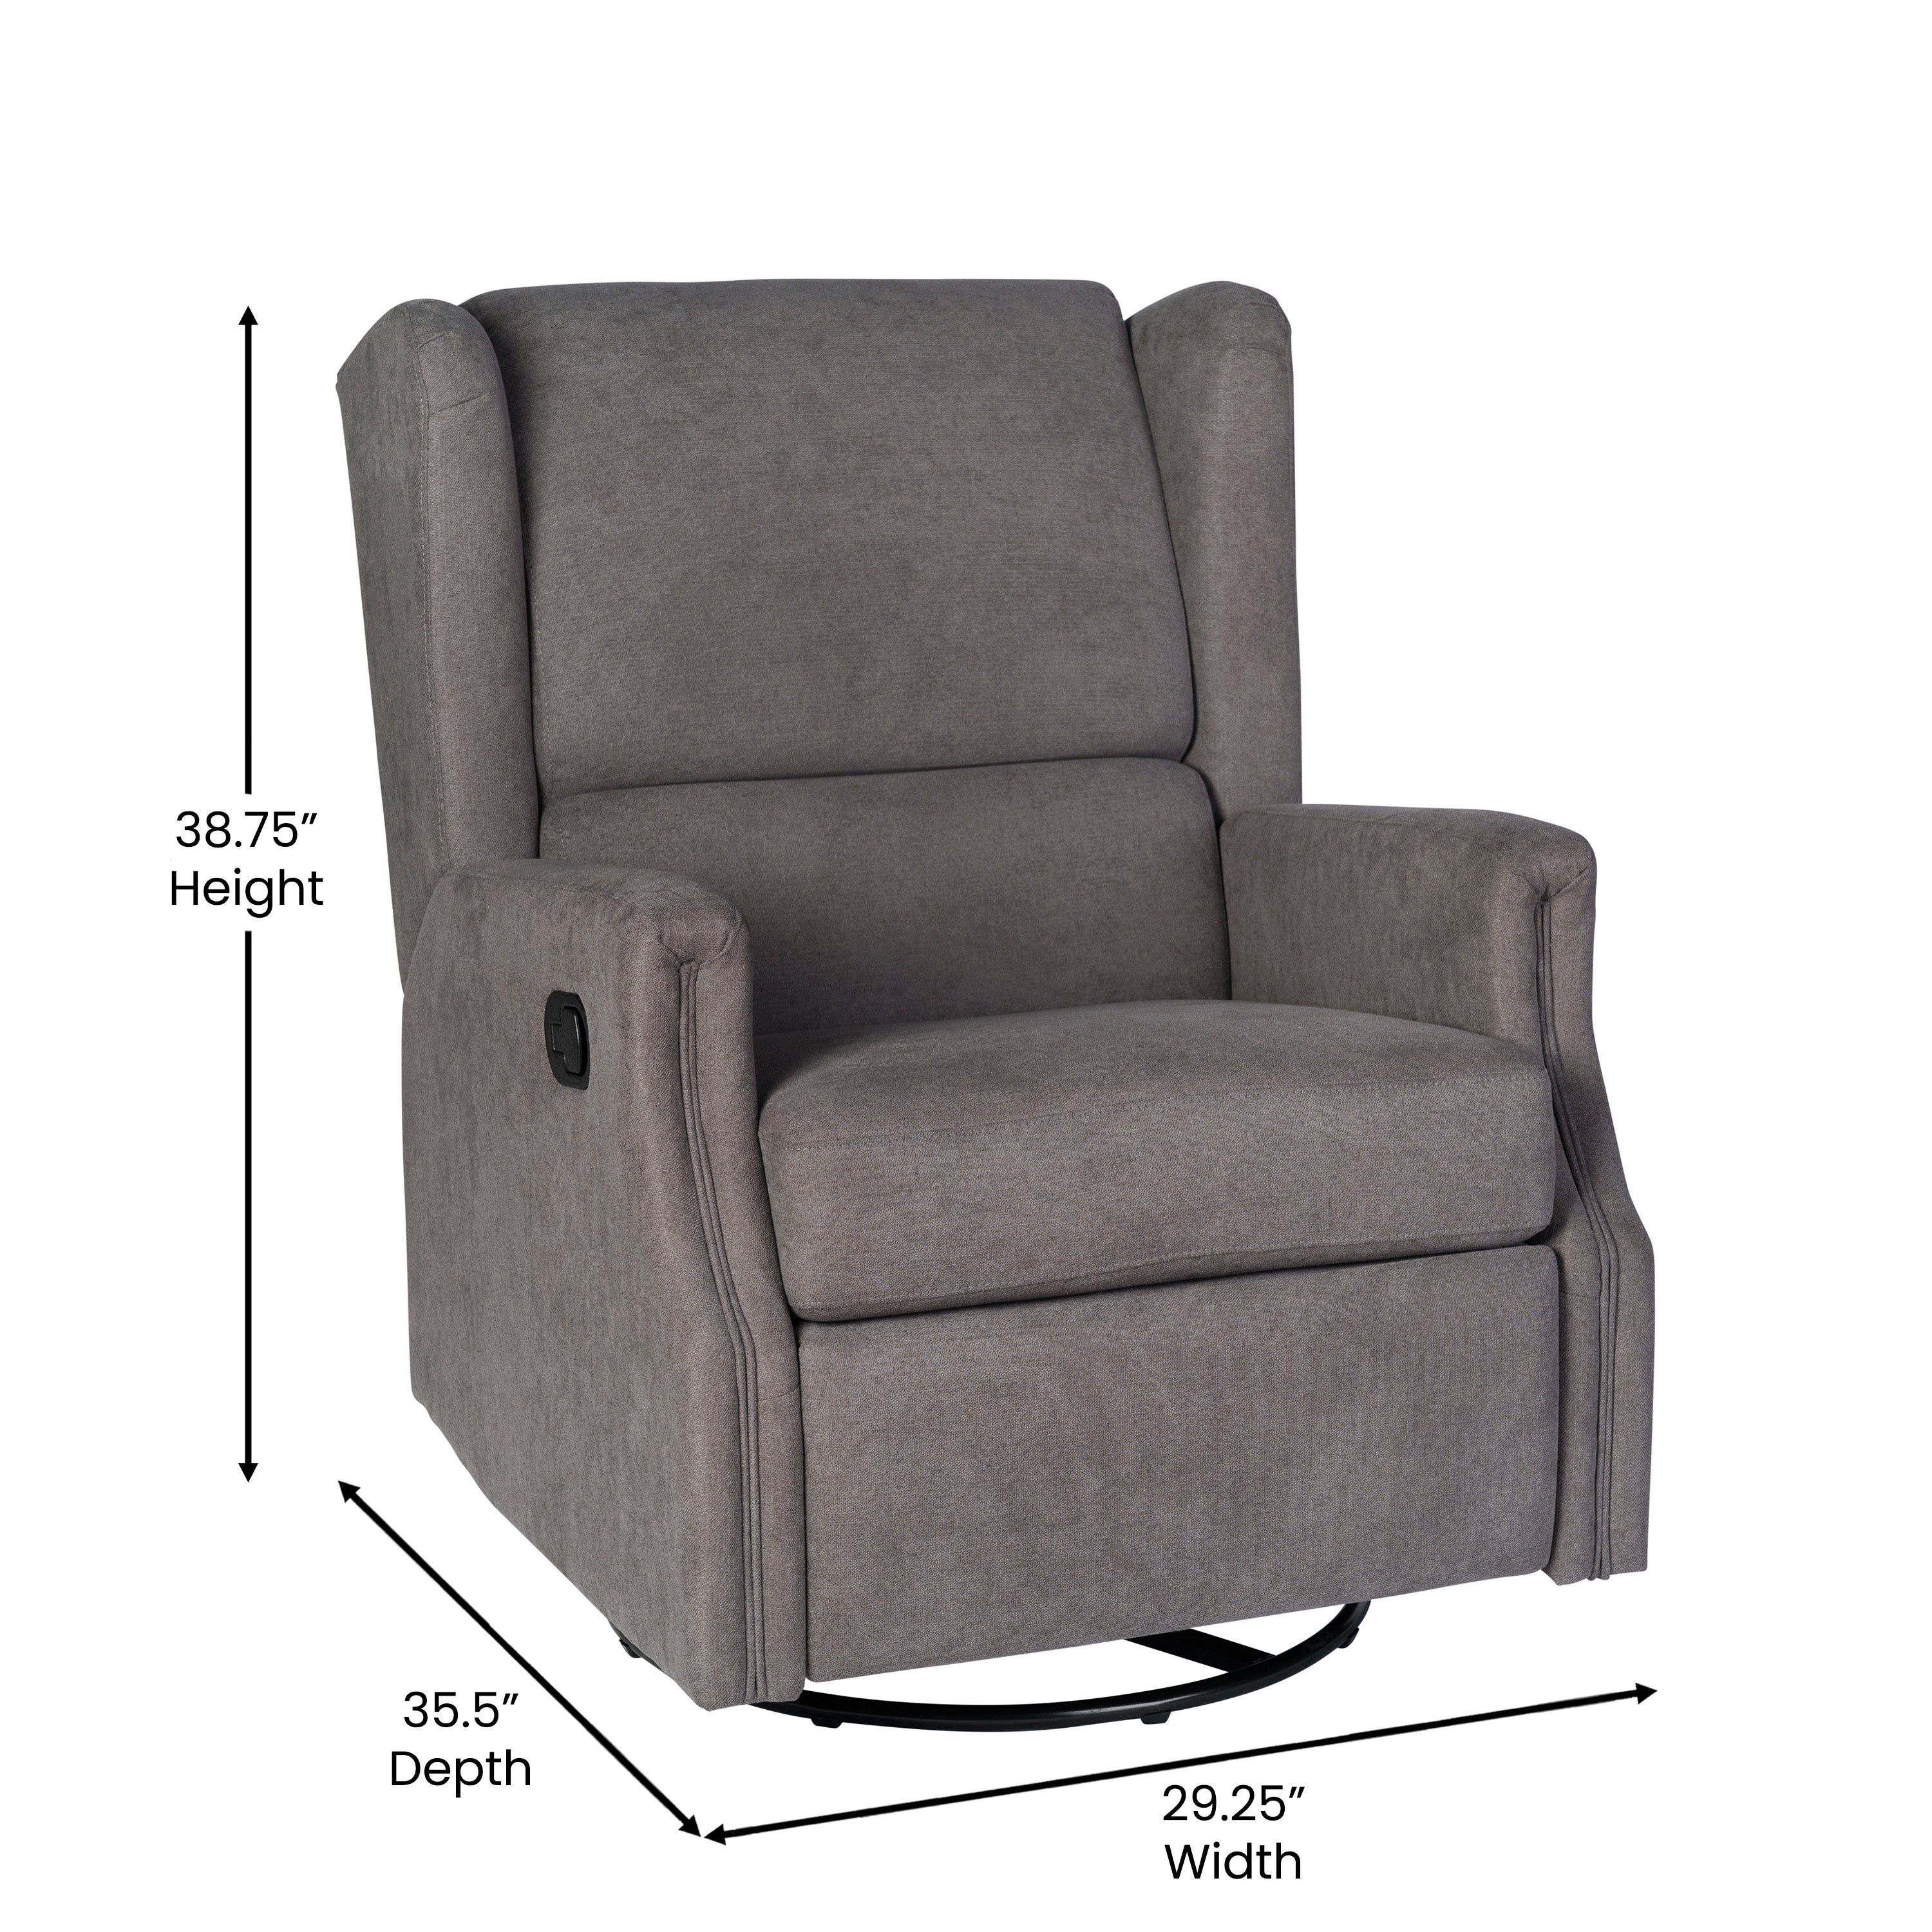 Omma Swivel Glider Rocker Recliner Chair, Manual 360 Degree Swivel Wingback Recliner Perfect for Living Room, Bedroom, or Nursery-Manual Recliners-Flash Furniture-Wall2Wall Furnishings